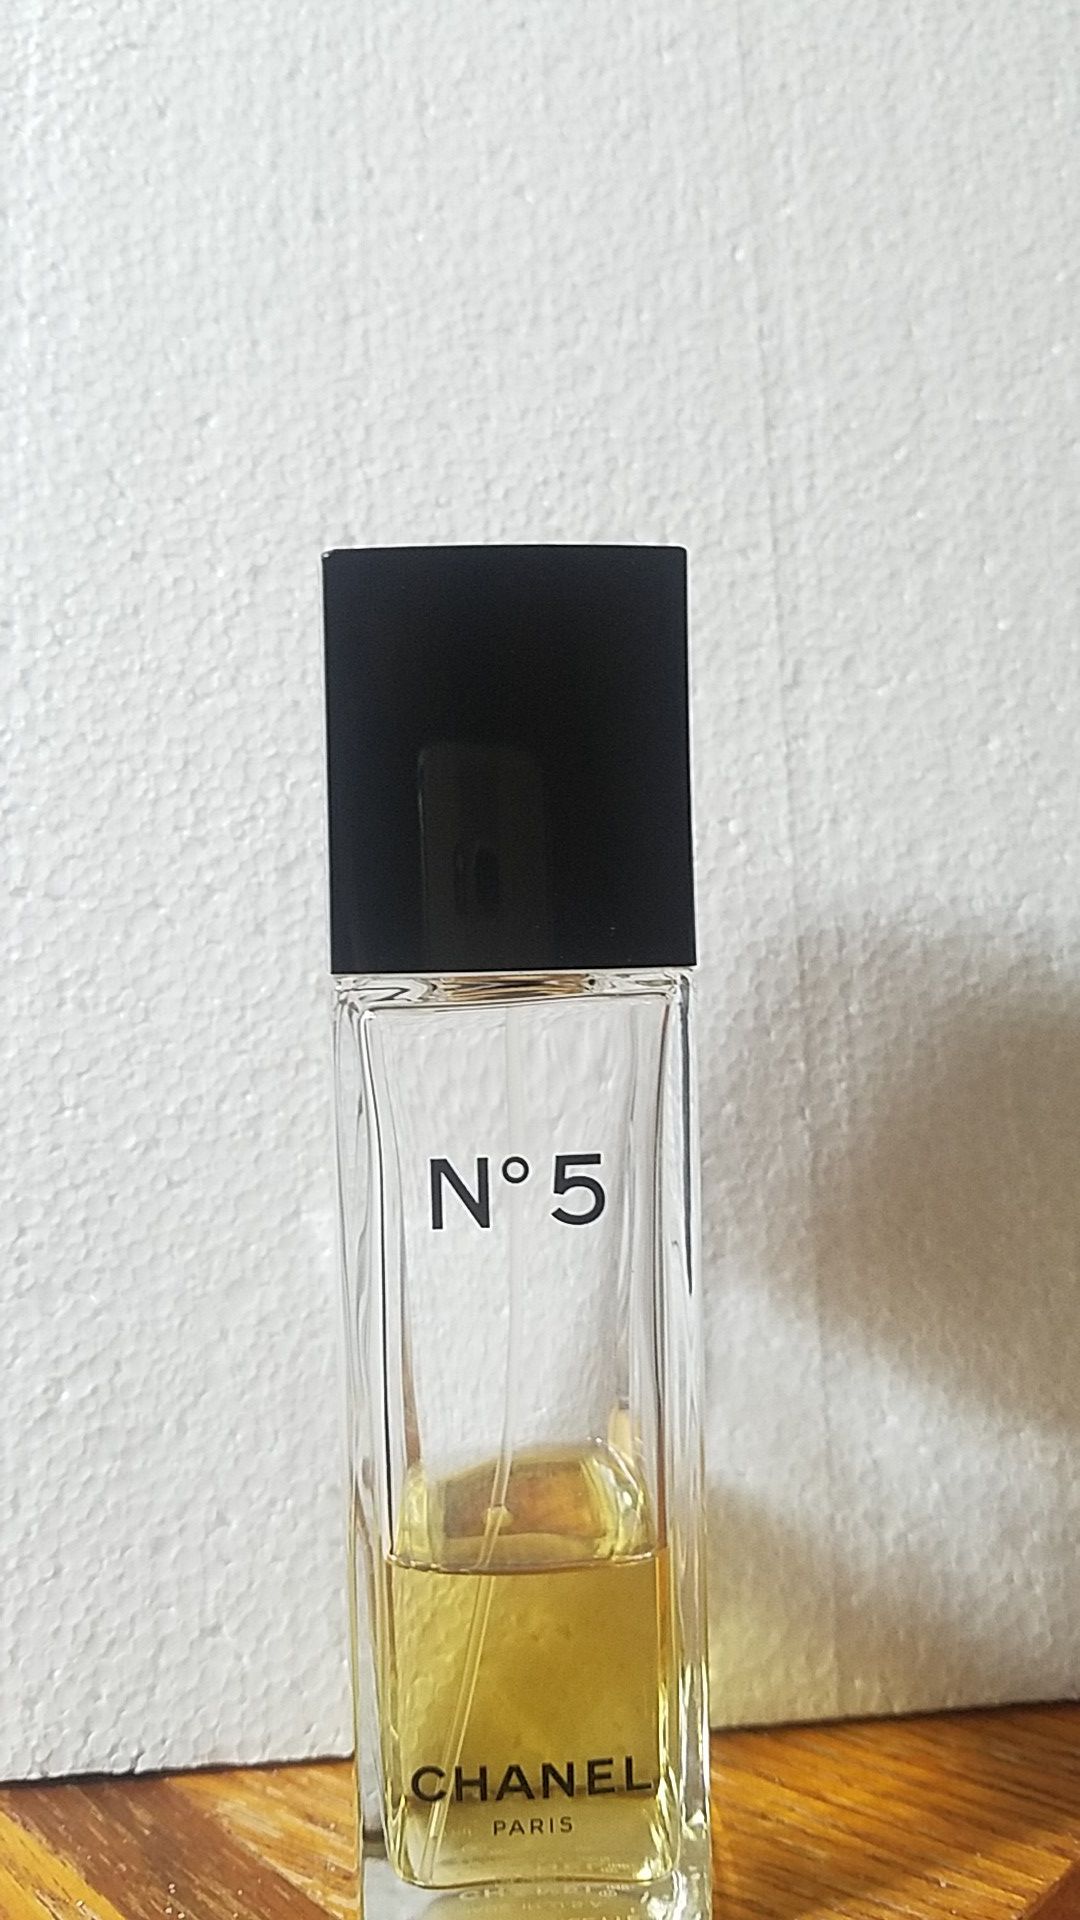 N°5 Chanel Paris I'm asking $20 or give me an offer